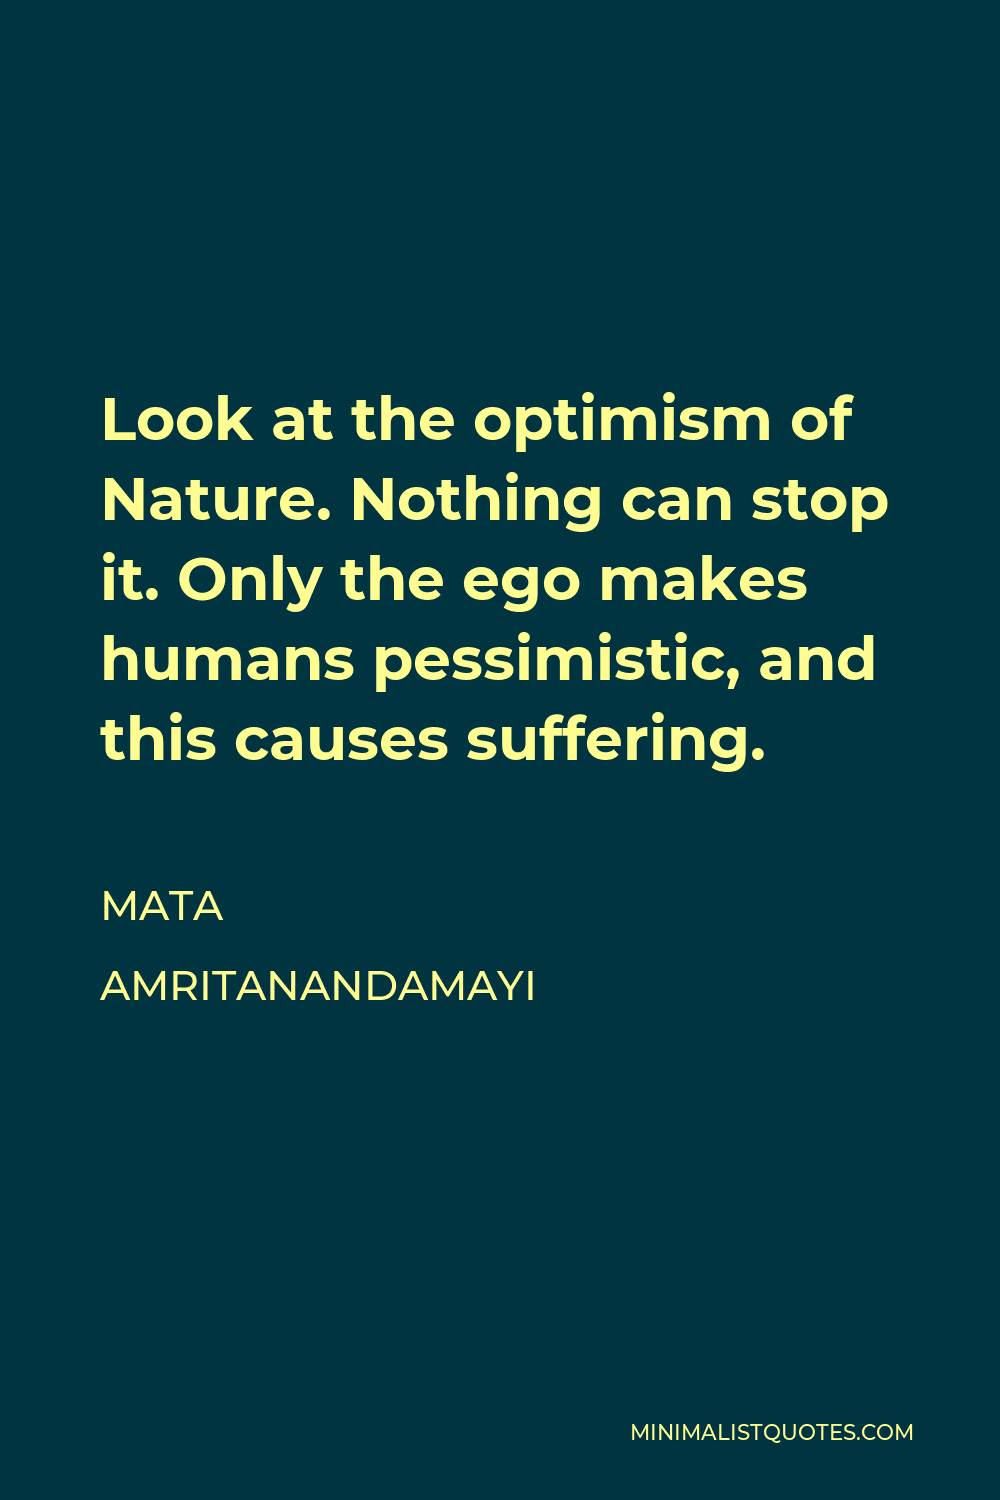 Mata Amritanandamayi Quote - Look at the optimism of Nature. Nothing can stop it. Only the ego makes humans pessimistic, and this causes suffering.